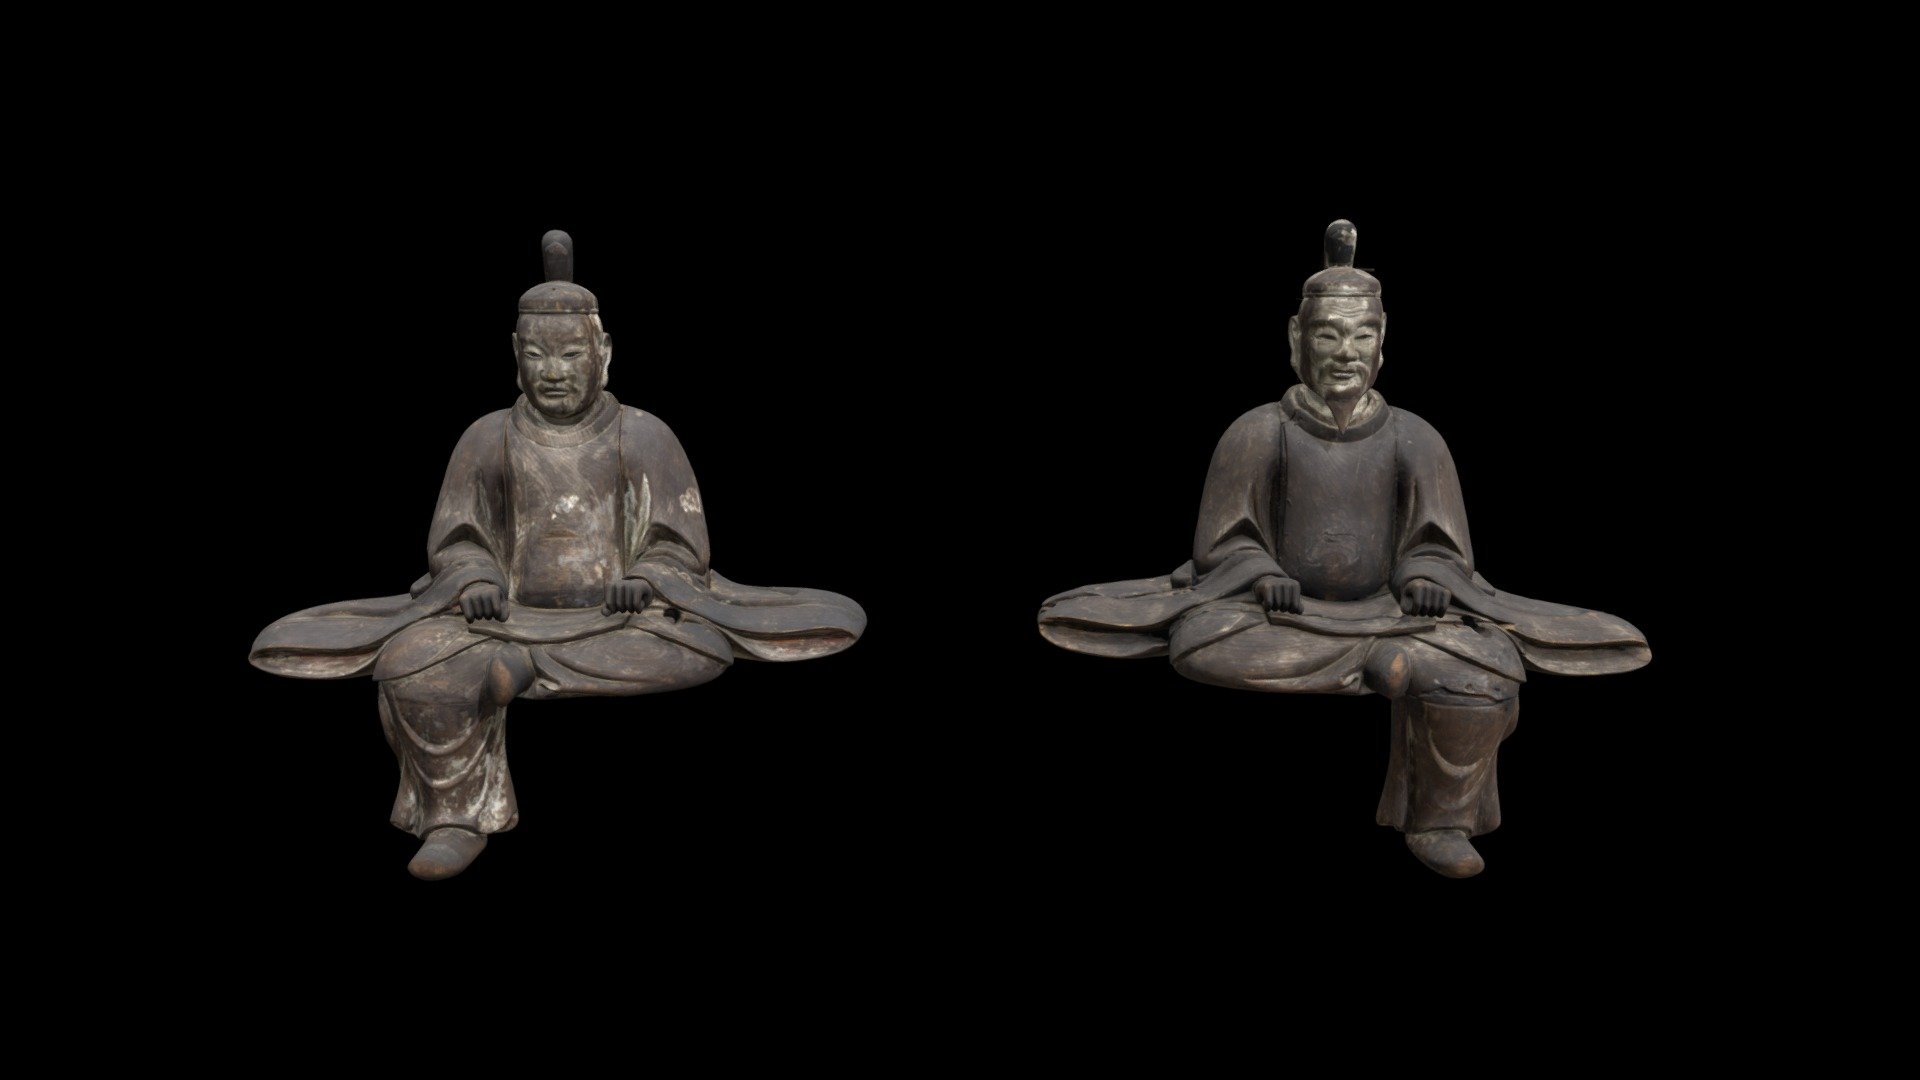 You can copy, modify, and distribute this work, even for commercial purposes, all without asking permission. Learn more about The Cleveland Museum of Art’s Open Access initiative: http://www.clevelandart.org/open-access-faqs

Pair of Guardian Figures (Zuishin), c. 1560–1625. Japan, Muromachi period (1392-1573) to Edo period (1615-1868). Japanese cypress (hinoki) with traces of color; crystal; 68.5 x 71.4 cm (26 15/16 x 28 1/8 in.); 70.2 x 70.5 cm (27 5/8 x 27 3/4 in.). The Cleveland Museum of Art, Purchase from the J. H. Wade Fund 2020.215

Learn more on The Cleveland Museum of Art’s Collection Online: https://www.clevelandart.org/art/2020.215 - 2020.215 Pair of Guardian Figures (Zuishin) - Download Free 3D model by Cleveland Museum of Art (@clevelandart) 3d model